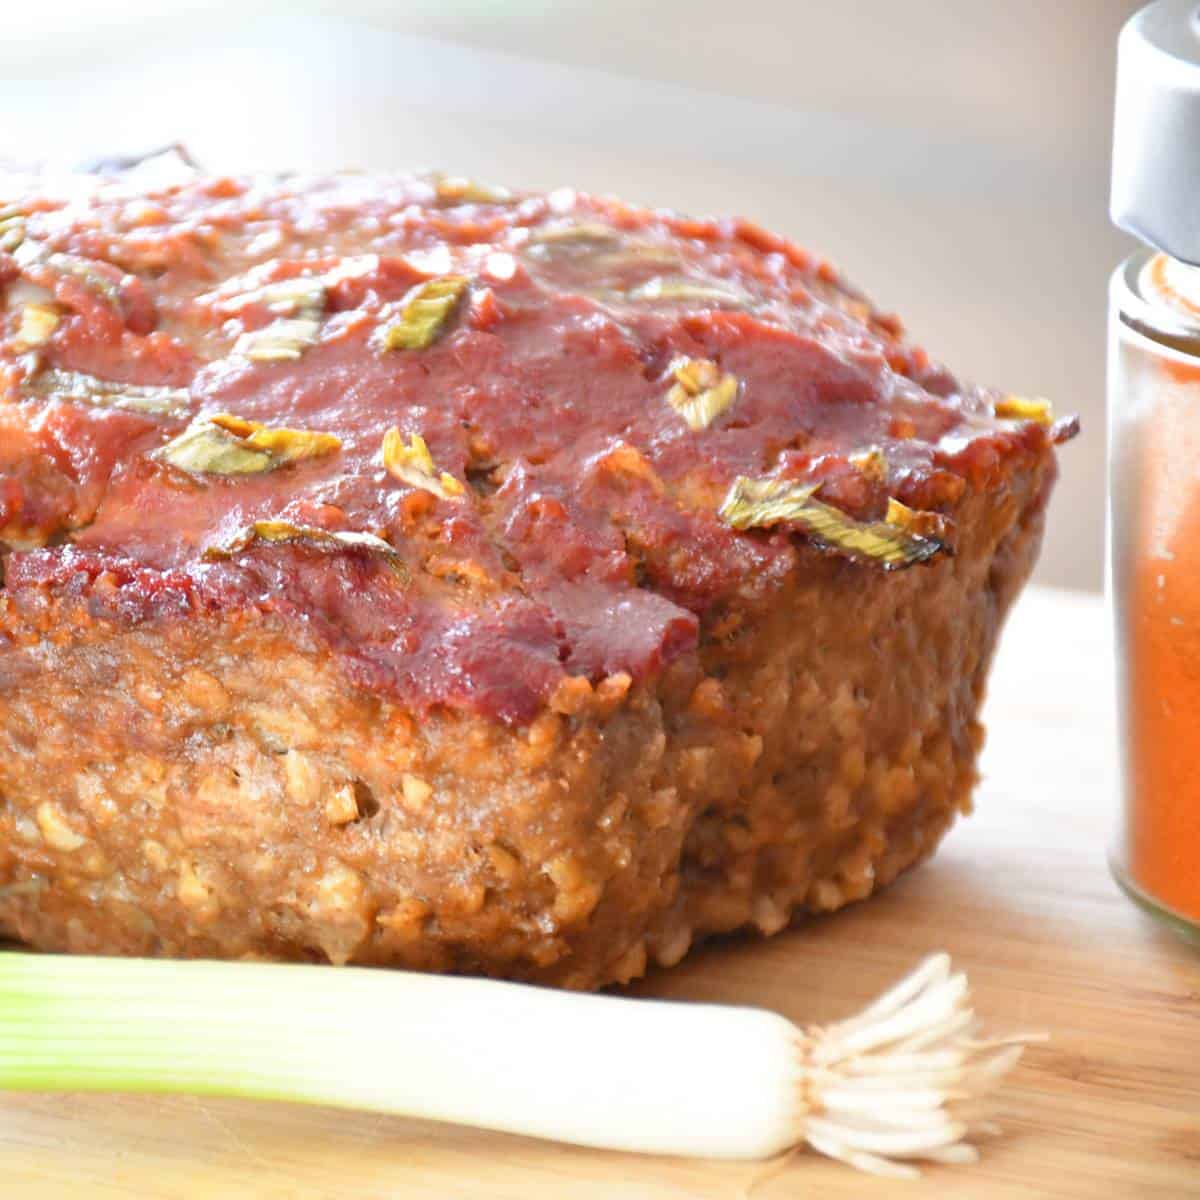 A low sodium meatloaf customized with low sodium BBQ sauce, paprika and green onions.